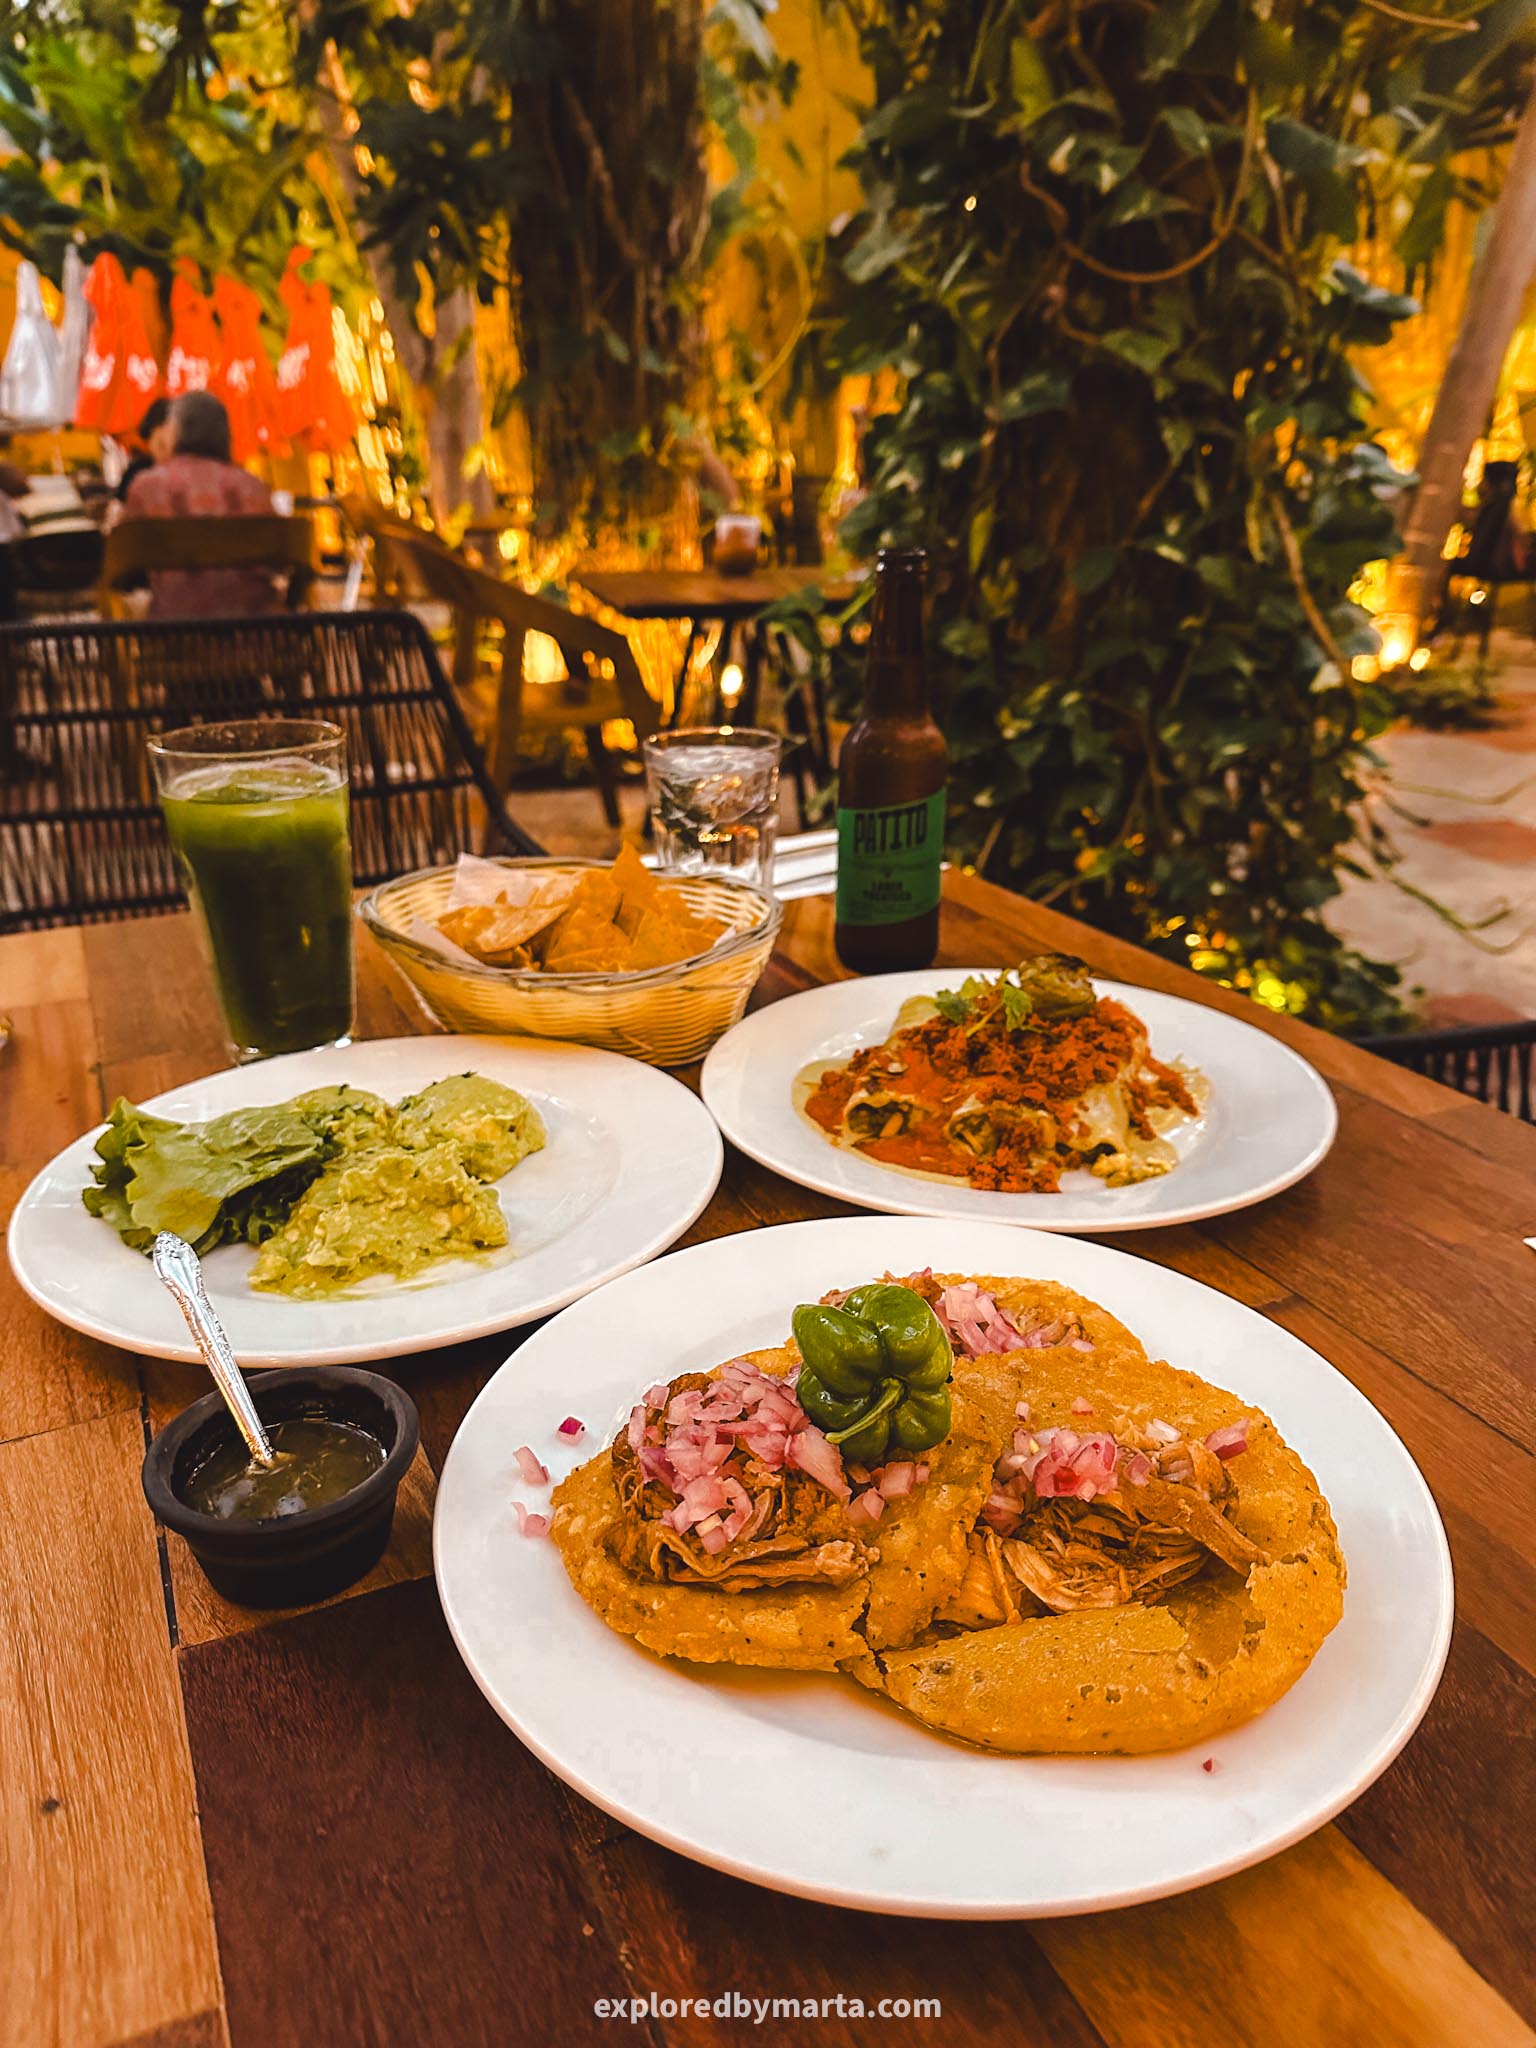 Merida, Mexico-taste Mayan cuisine and Yucatecan dishes at Museum of Yucateca Gastronomy